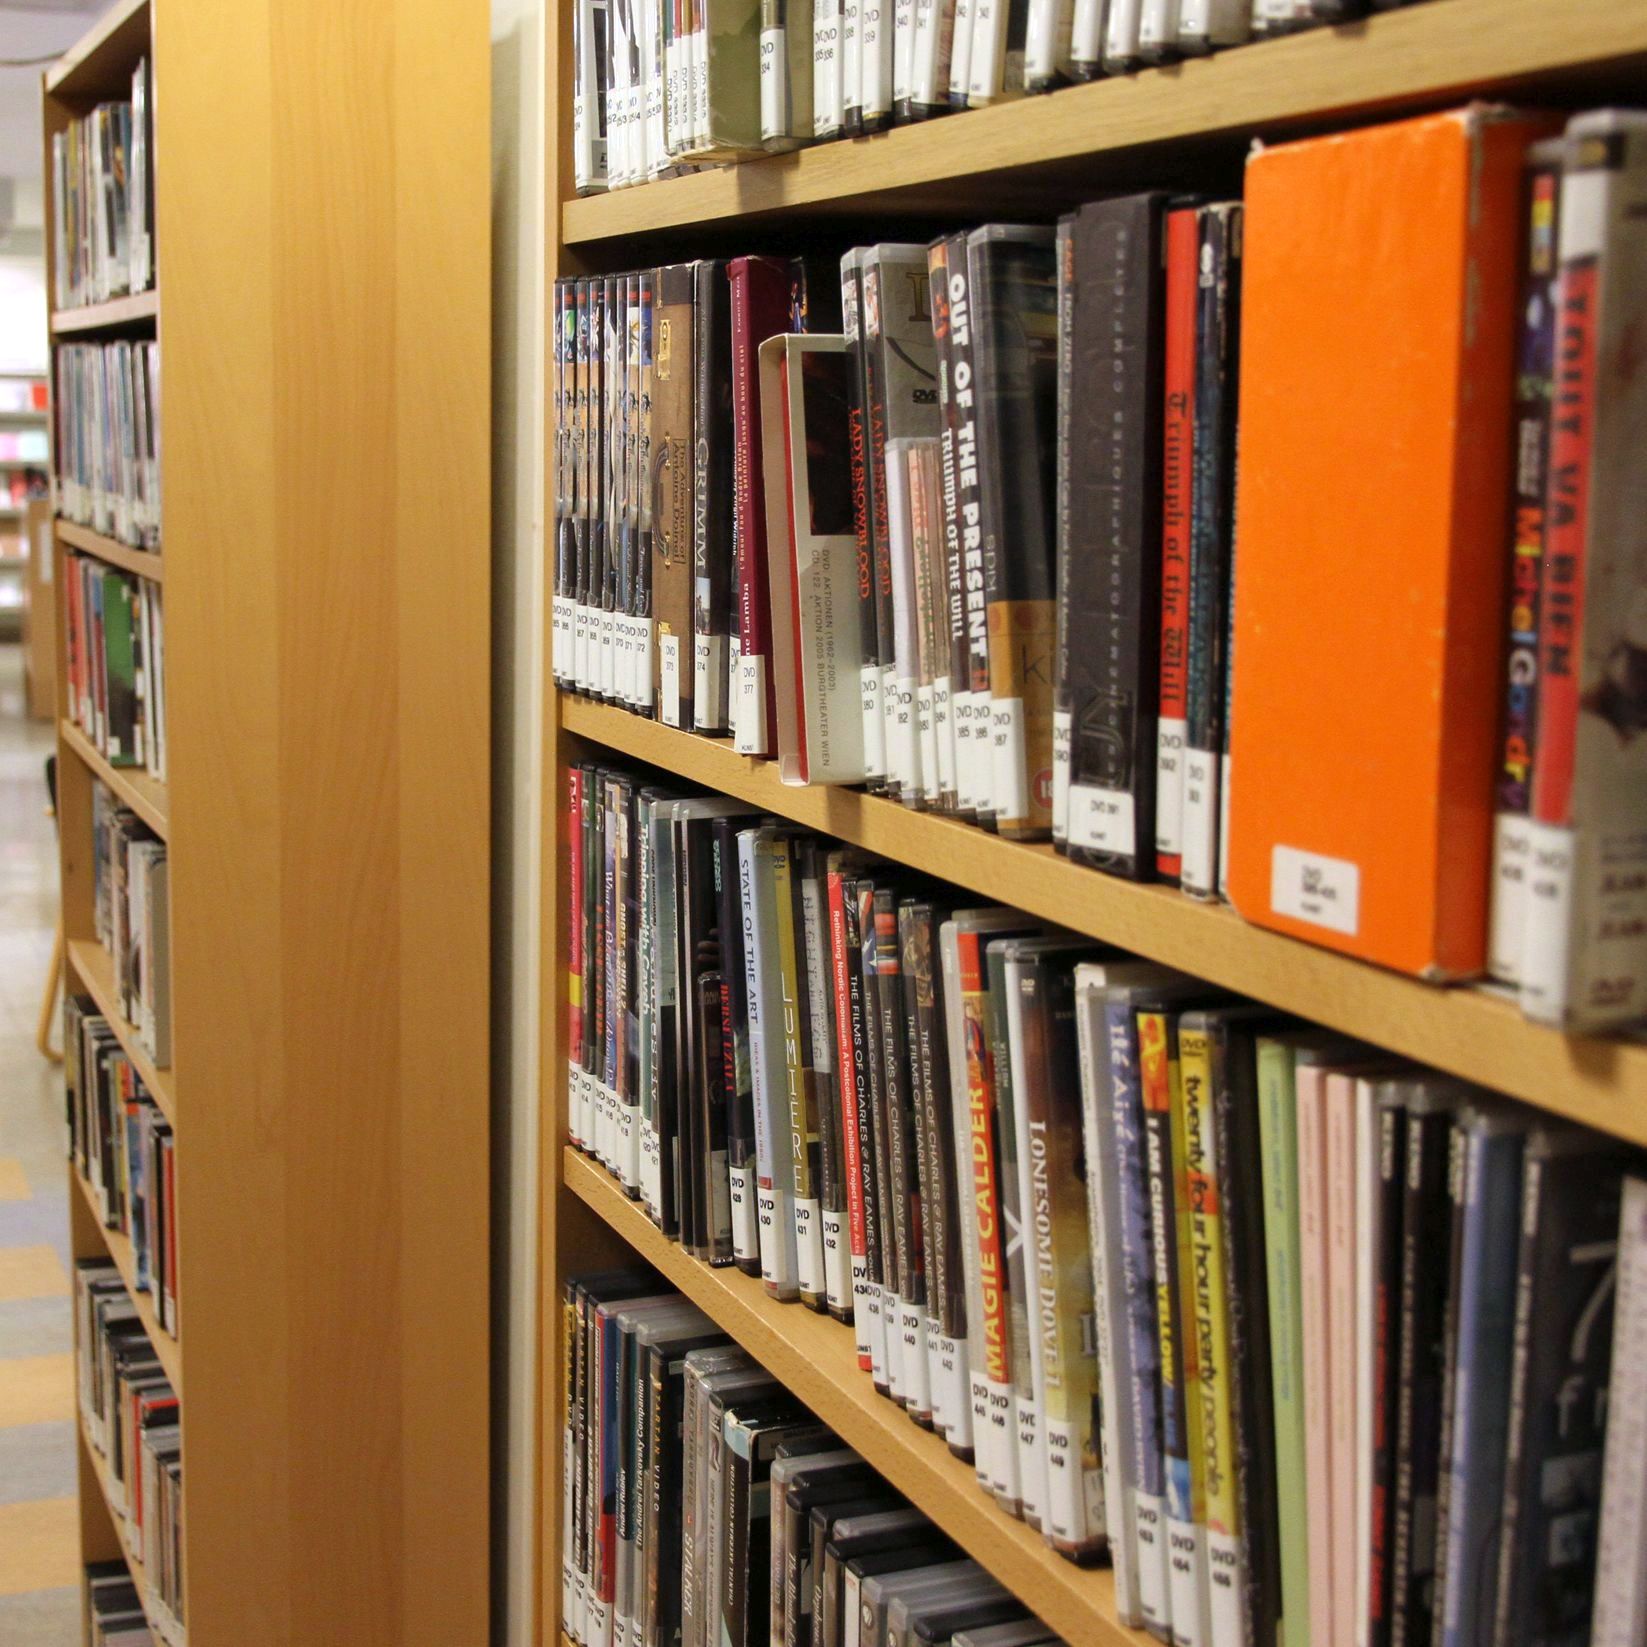 DVD collection, art library